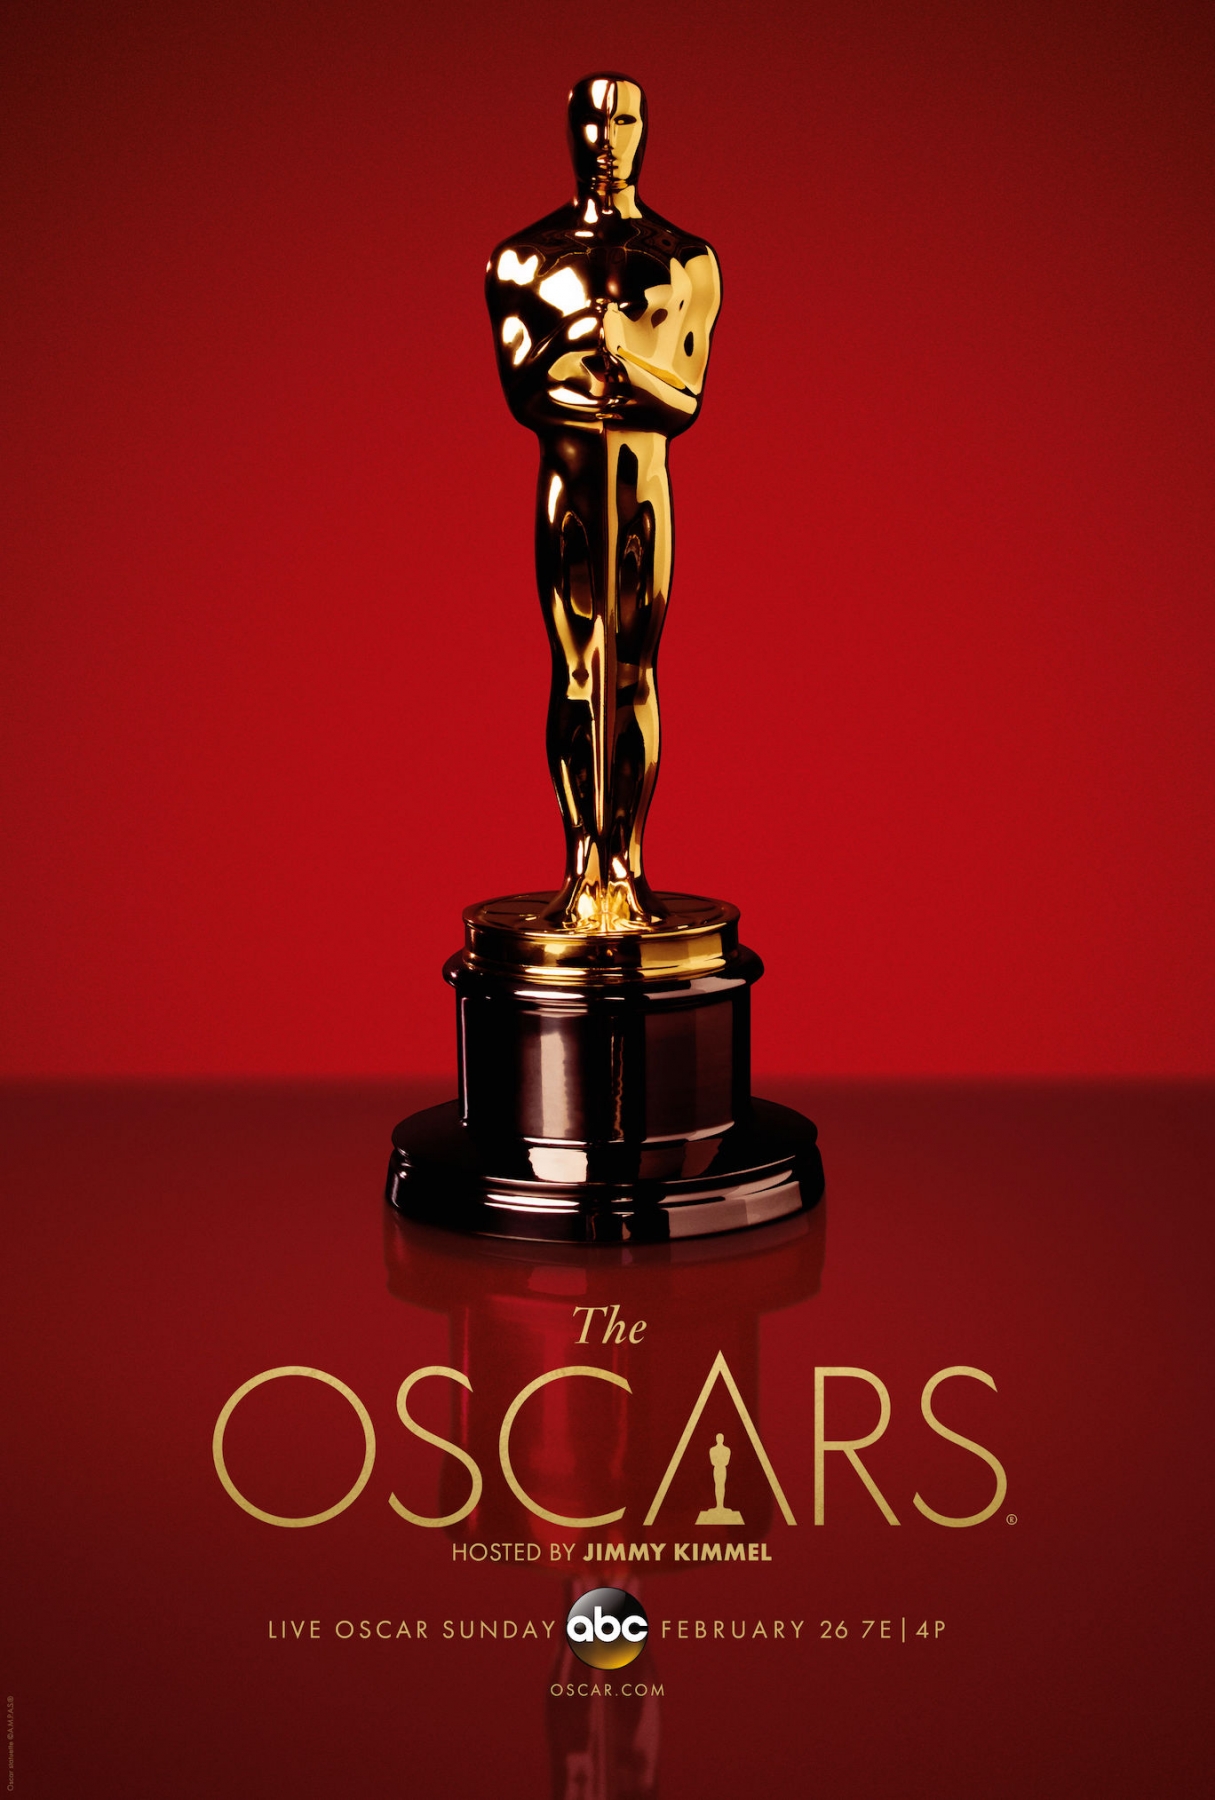 89th Oscars nominations announced